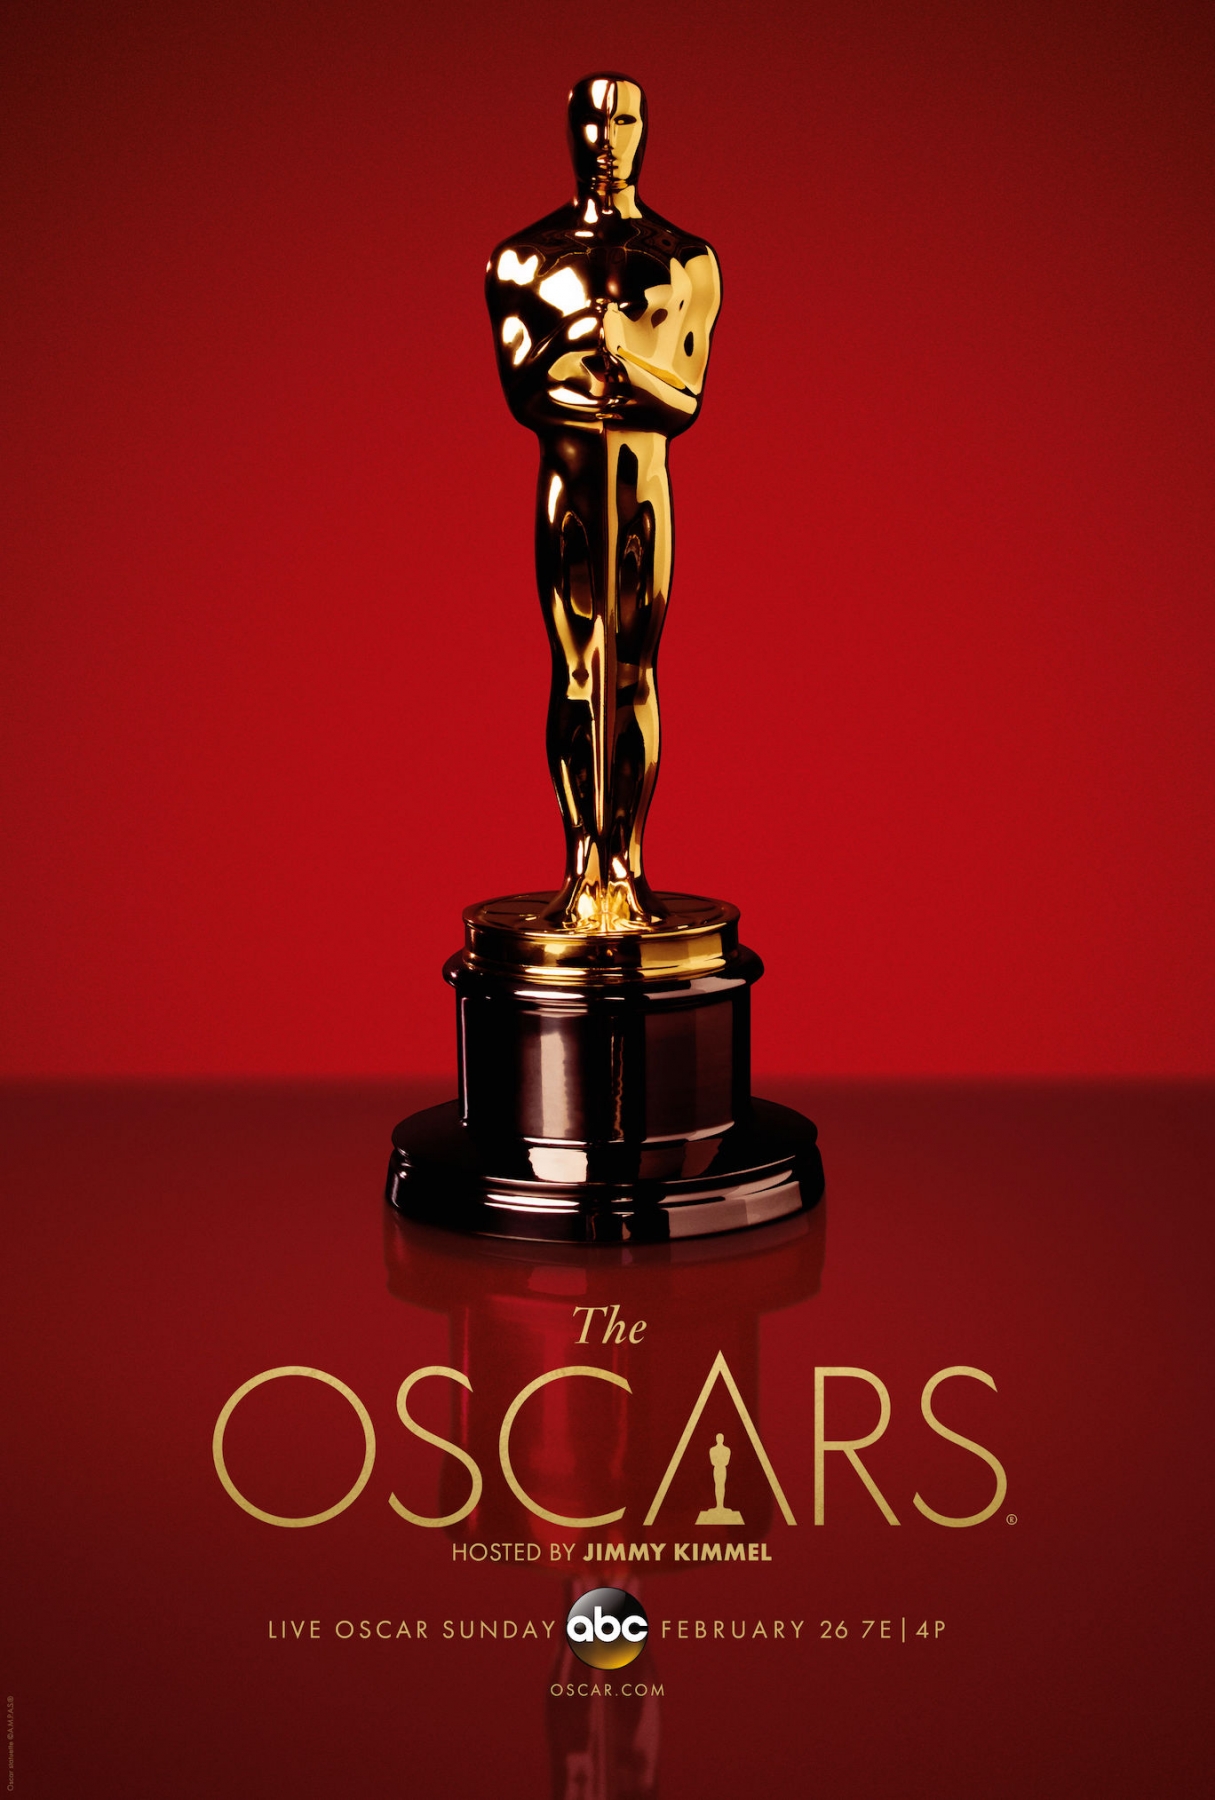 89th Oscars nominations announced